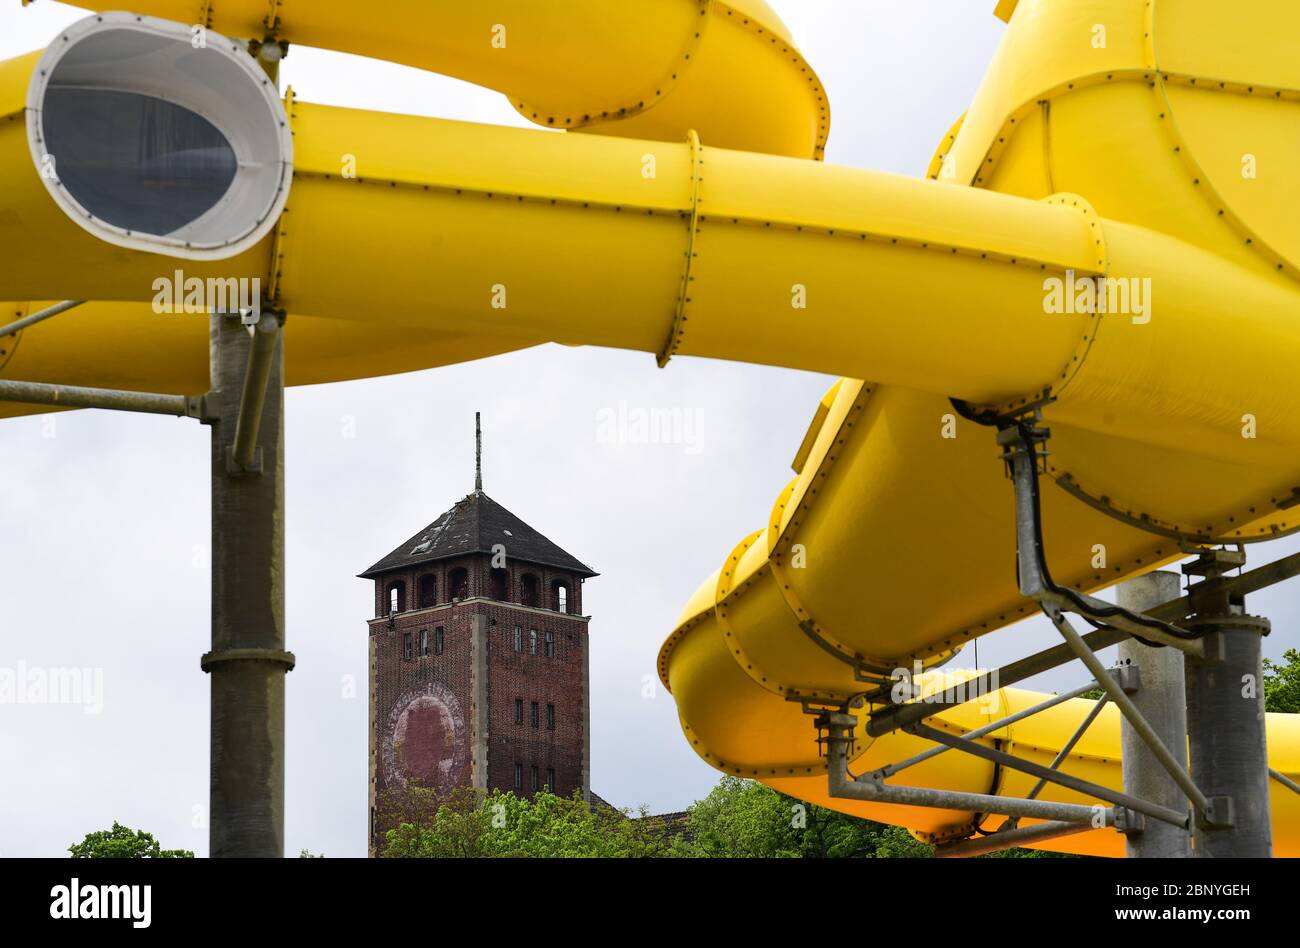 Potsdam, Germany. 14th May, 2020. The tower on the Brauhausberg can be seen  behind the yellow